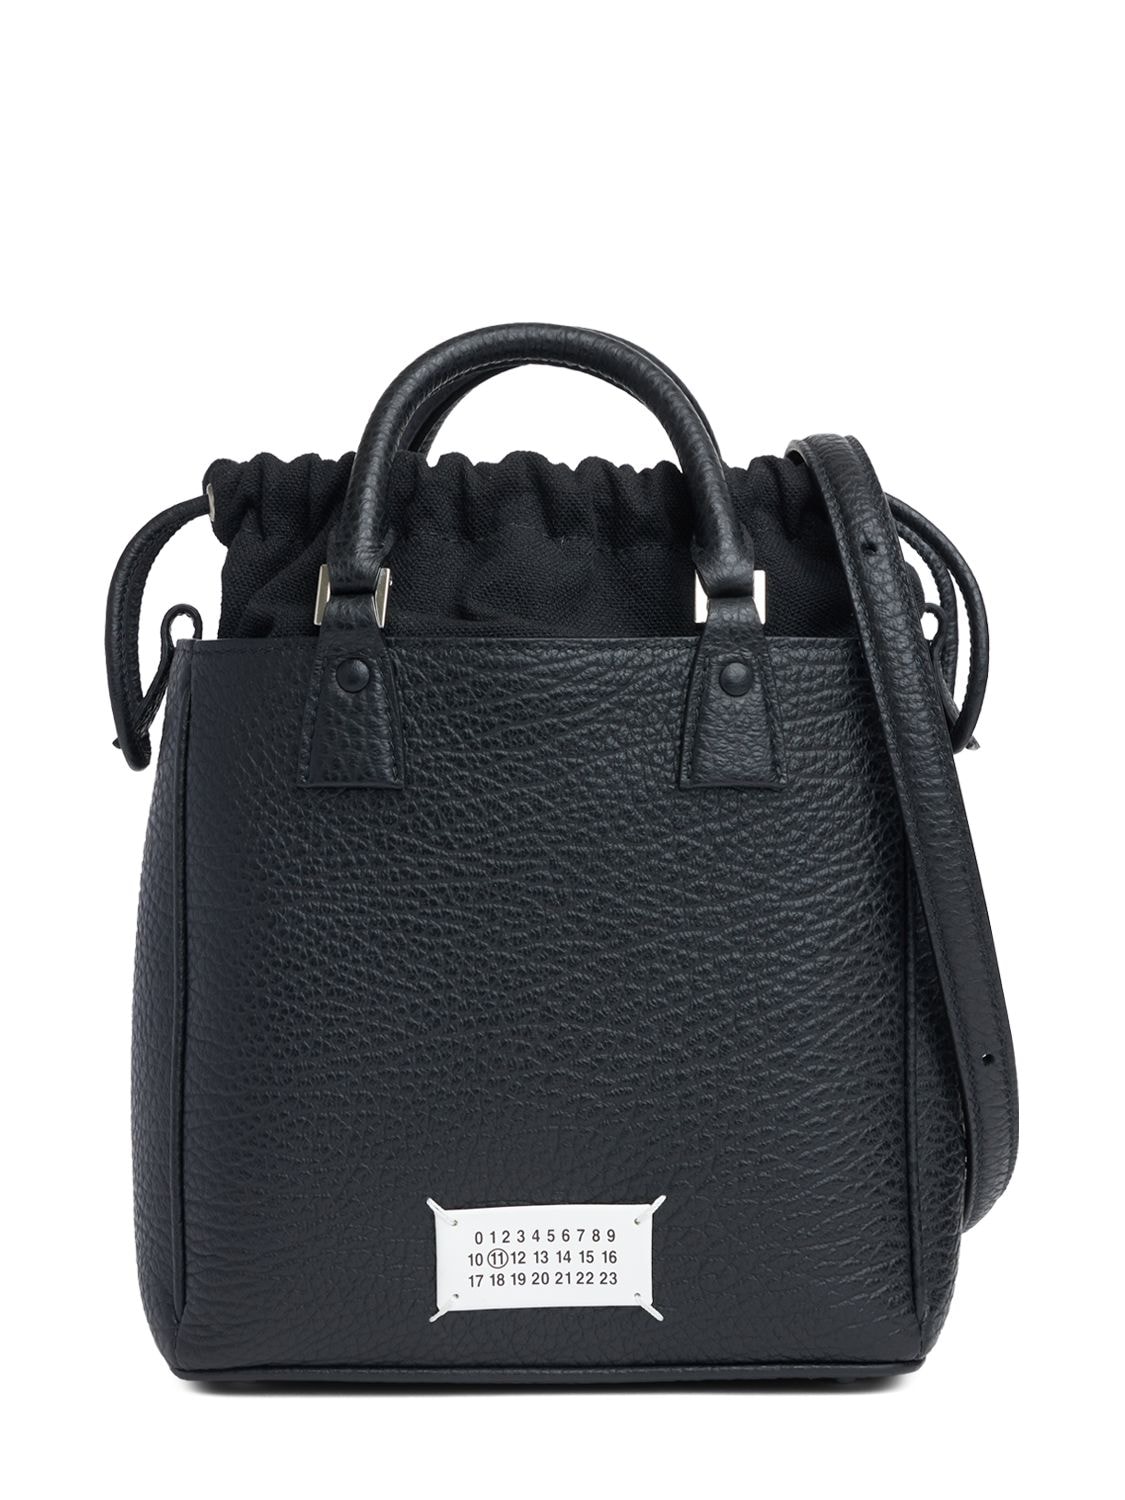 Maison Margiela 5ac Tote Vertical Grained Leather Bag In Black